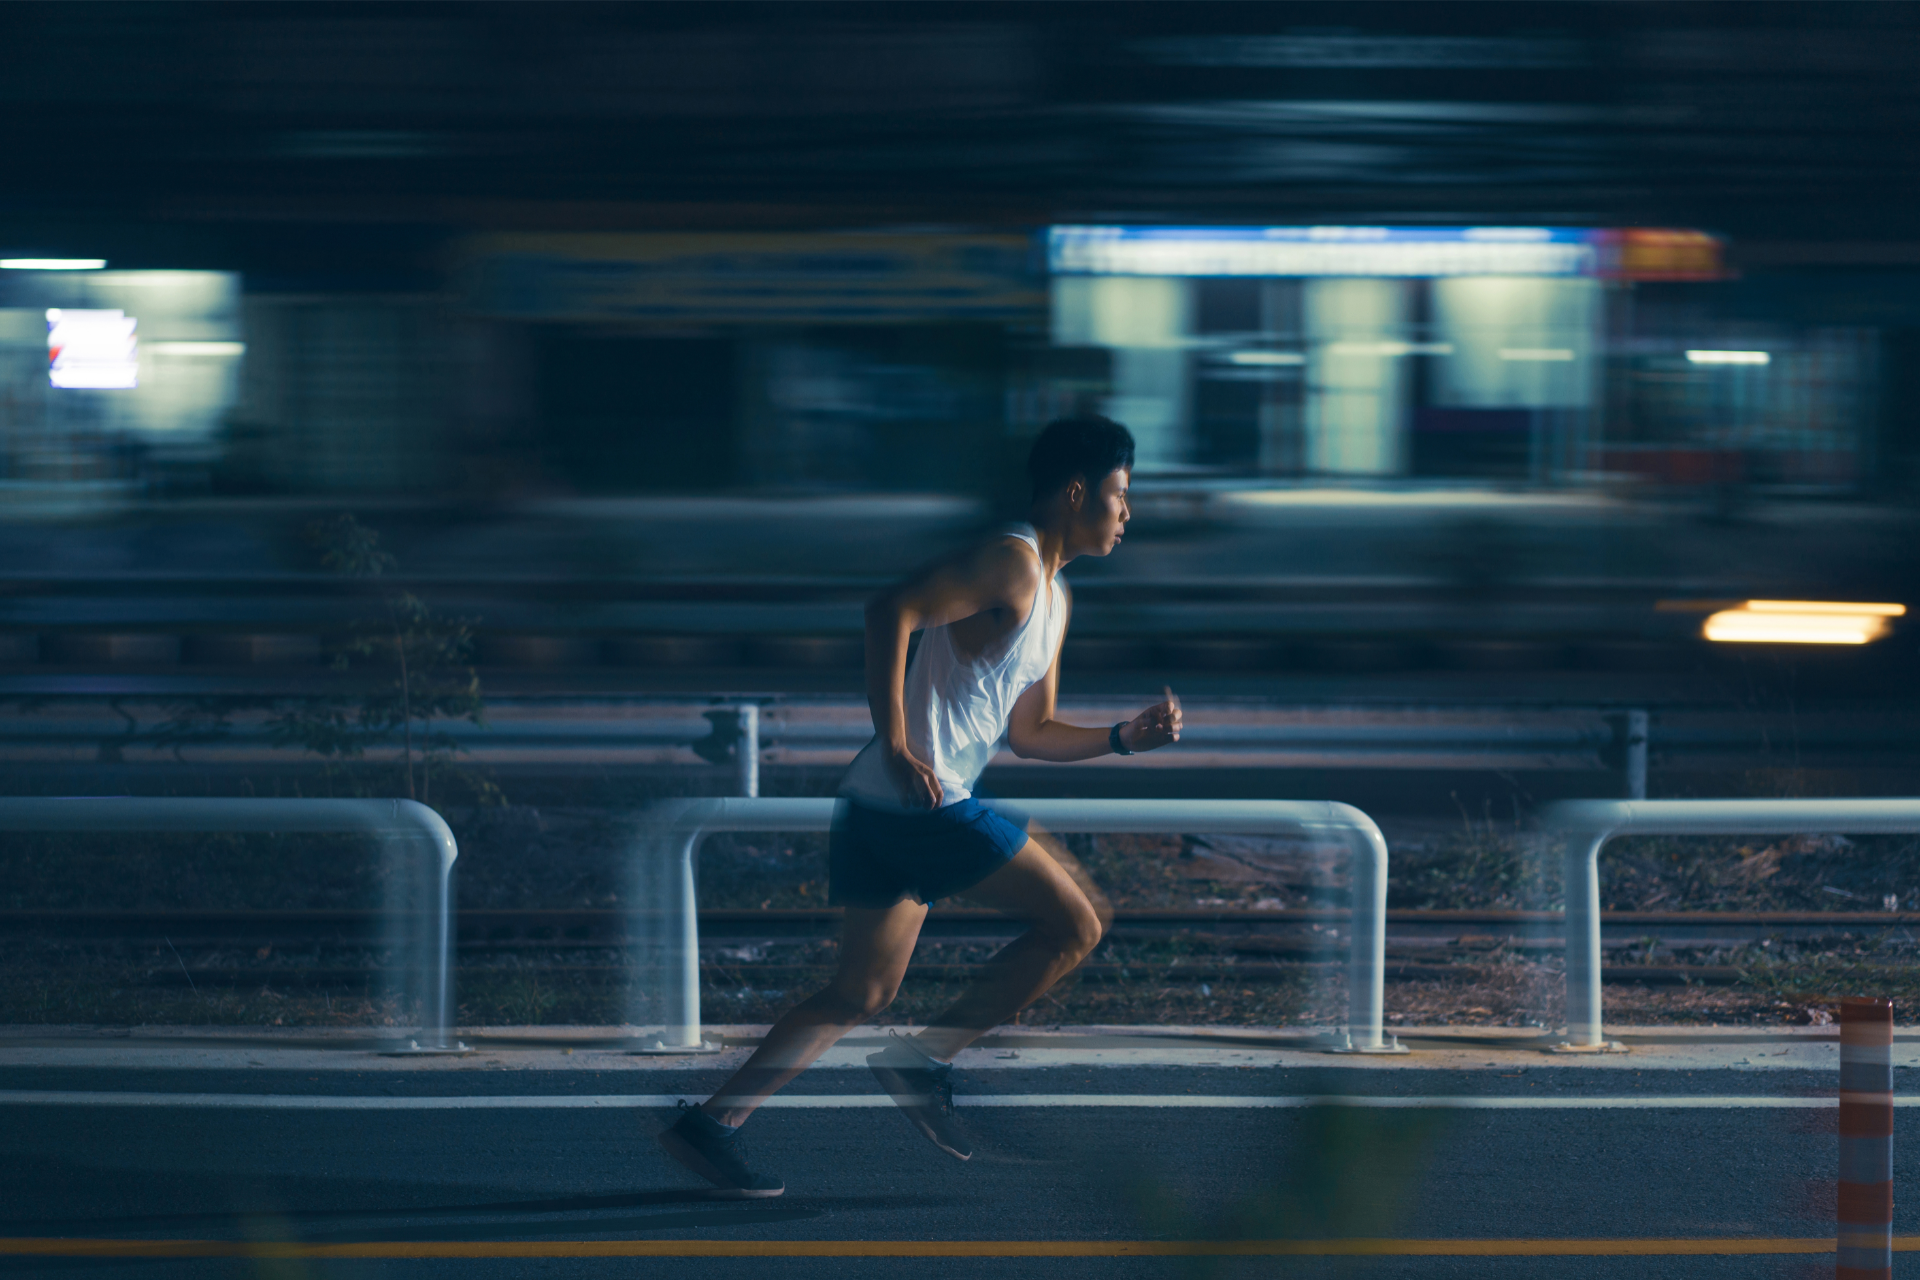 A young man running in the city at night.